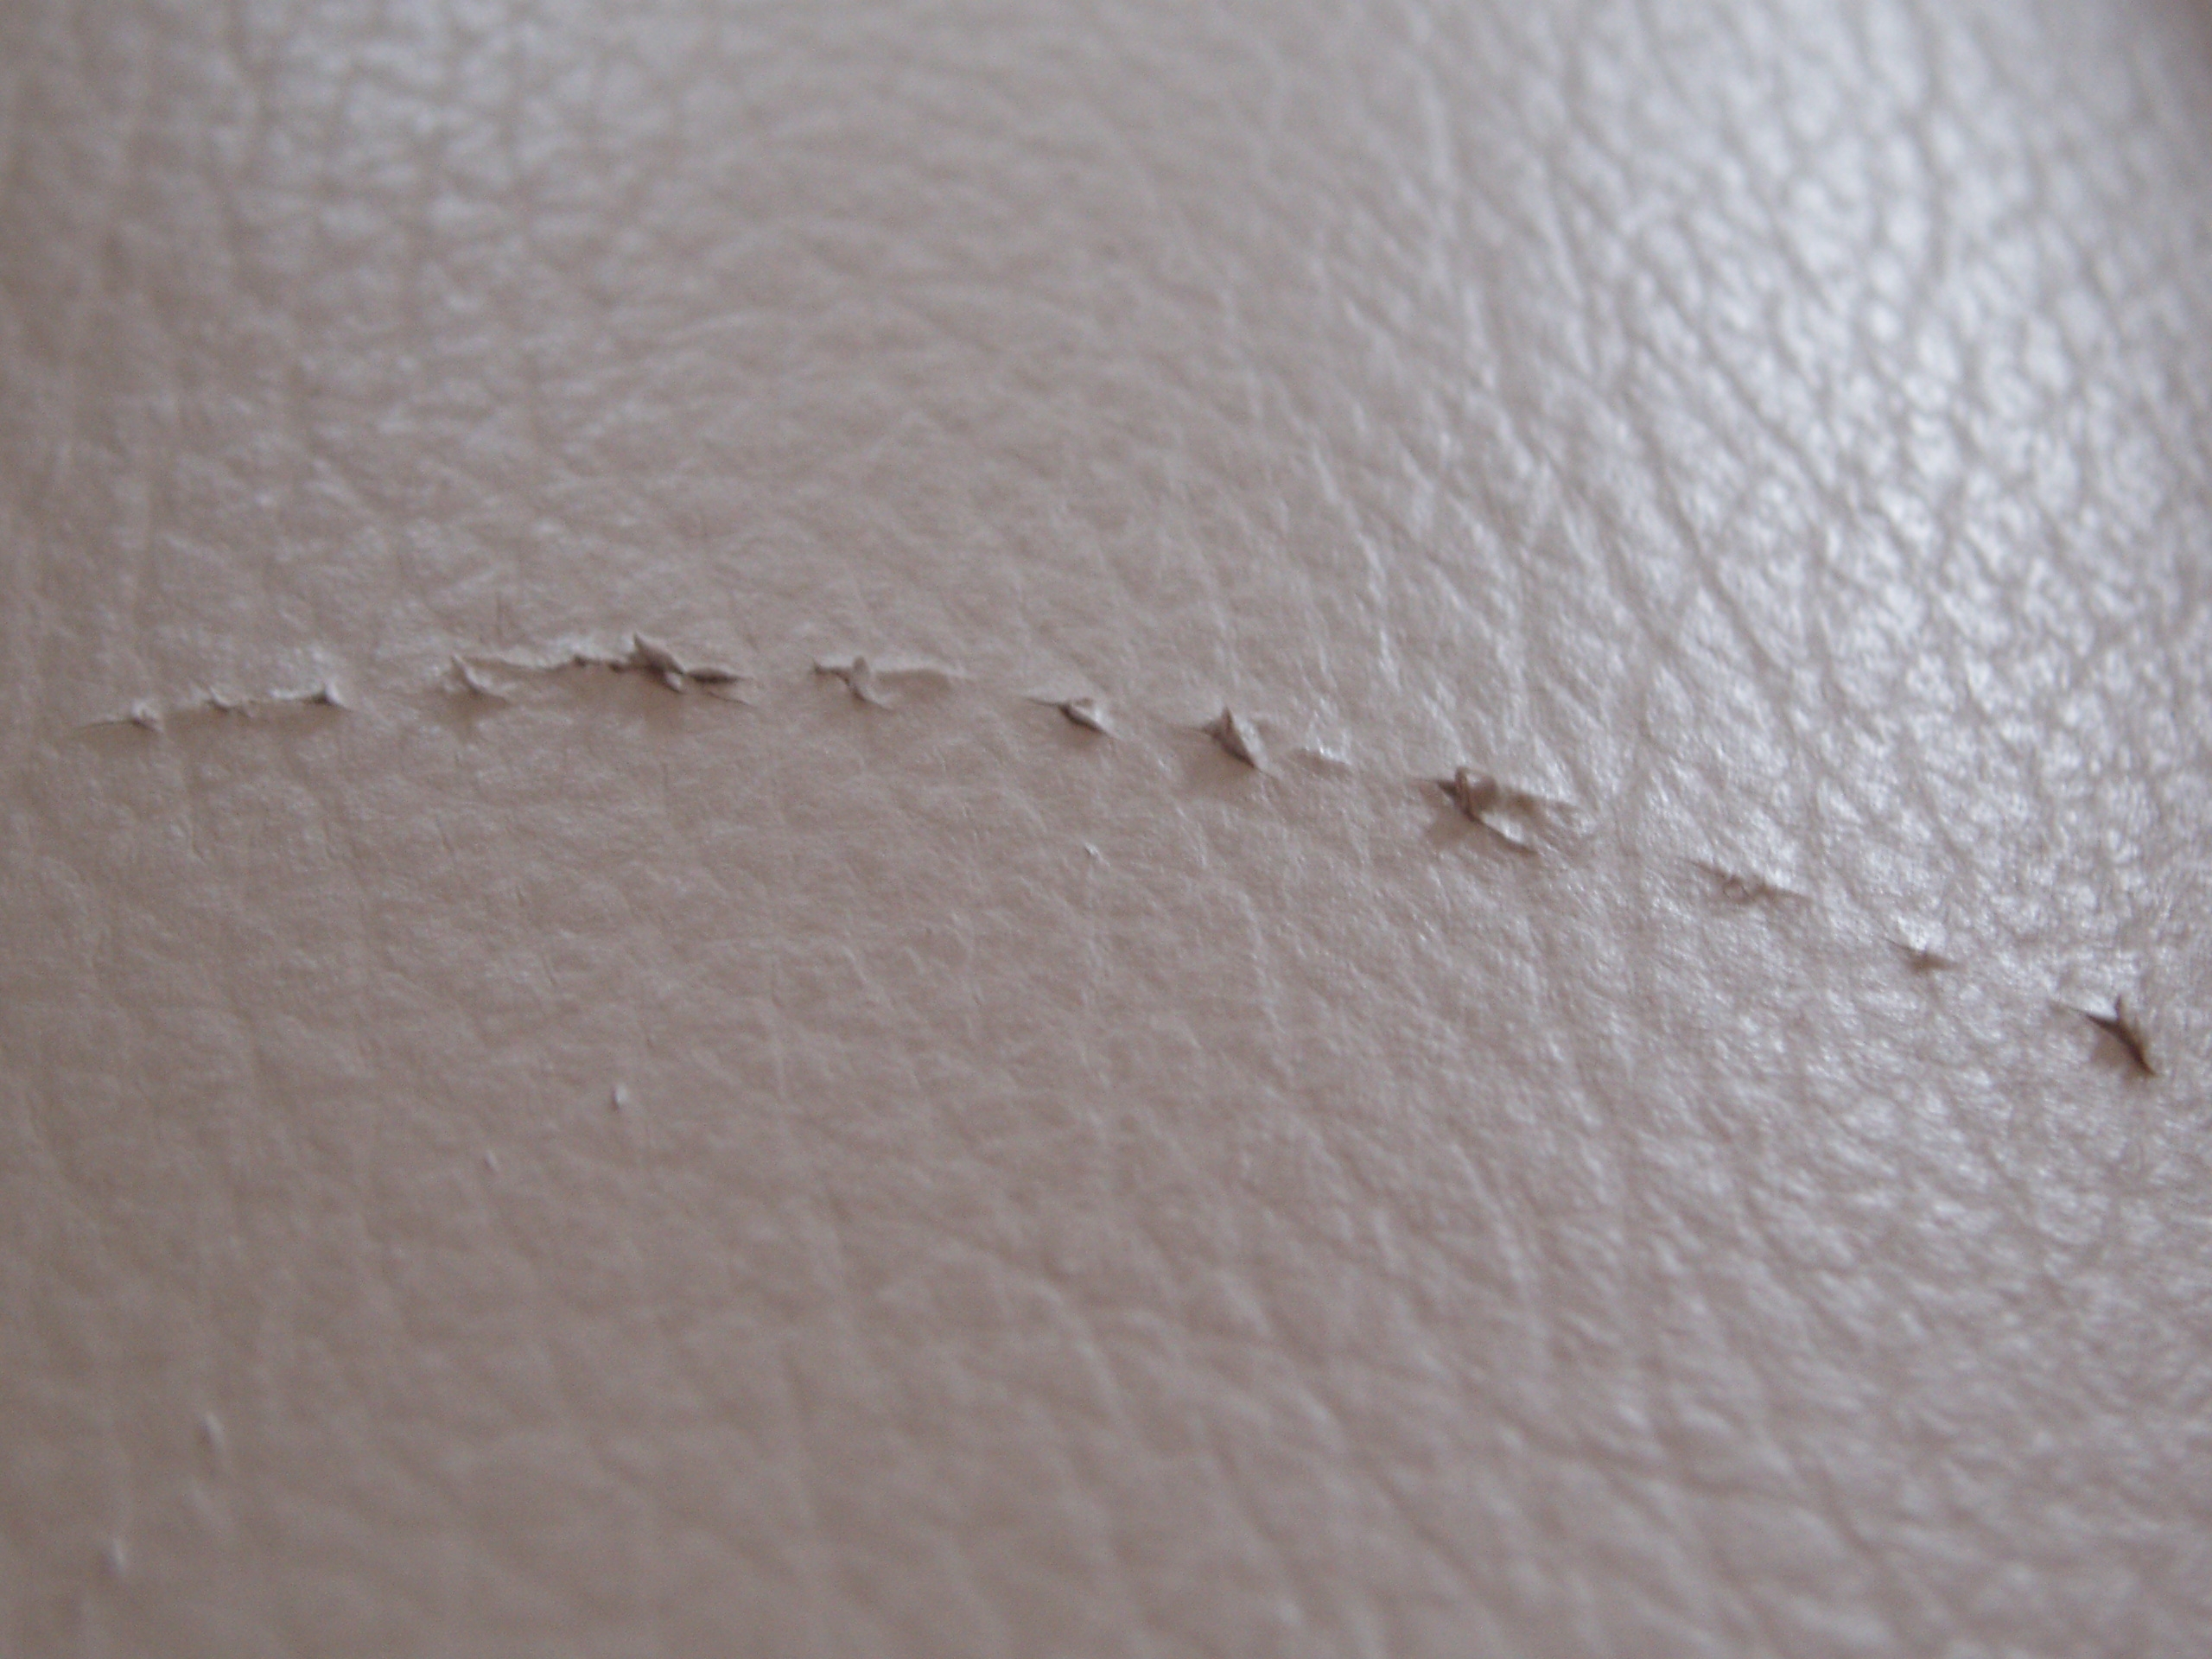 How To Repair Cat Scratches On Leather, How To Fix Leather Couch After Cat Scratches